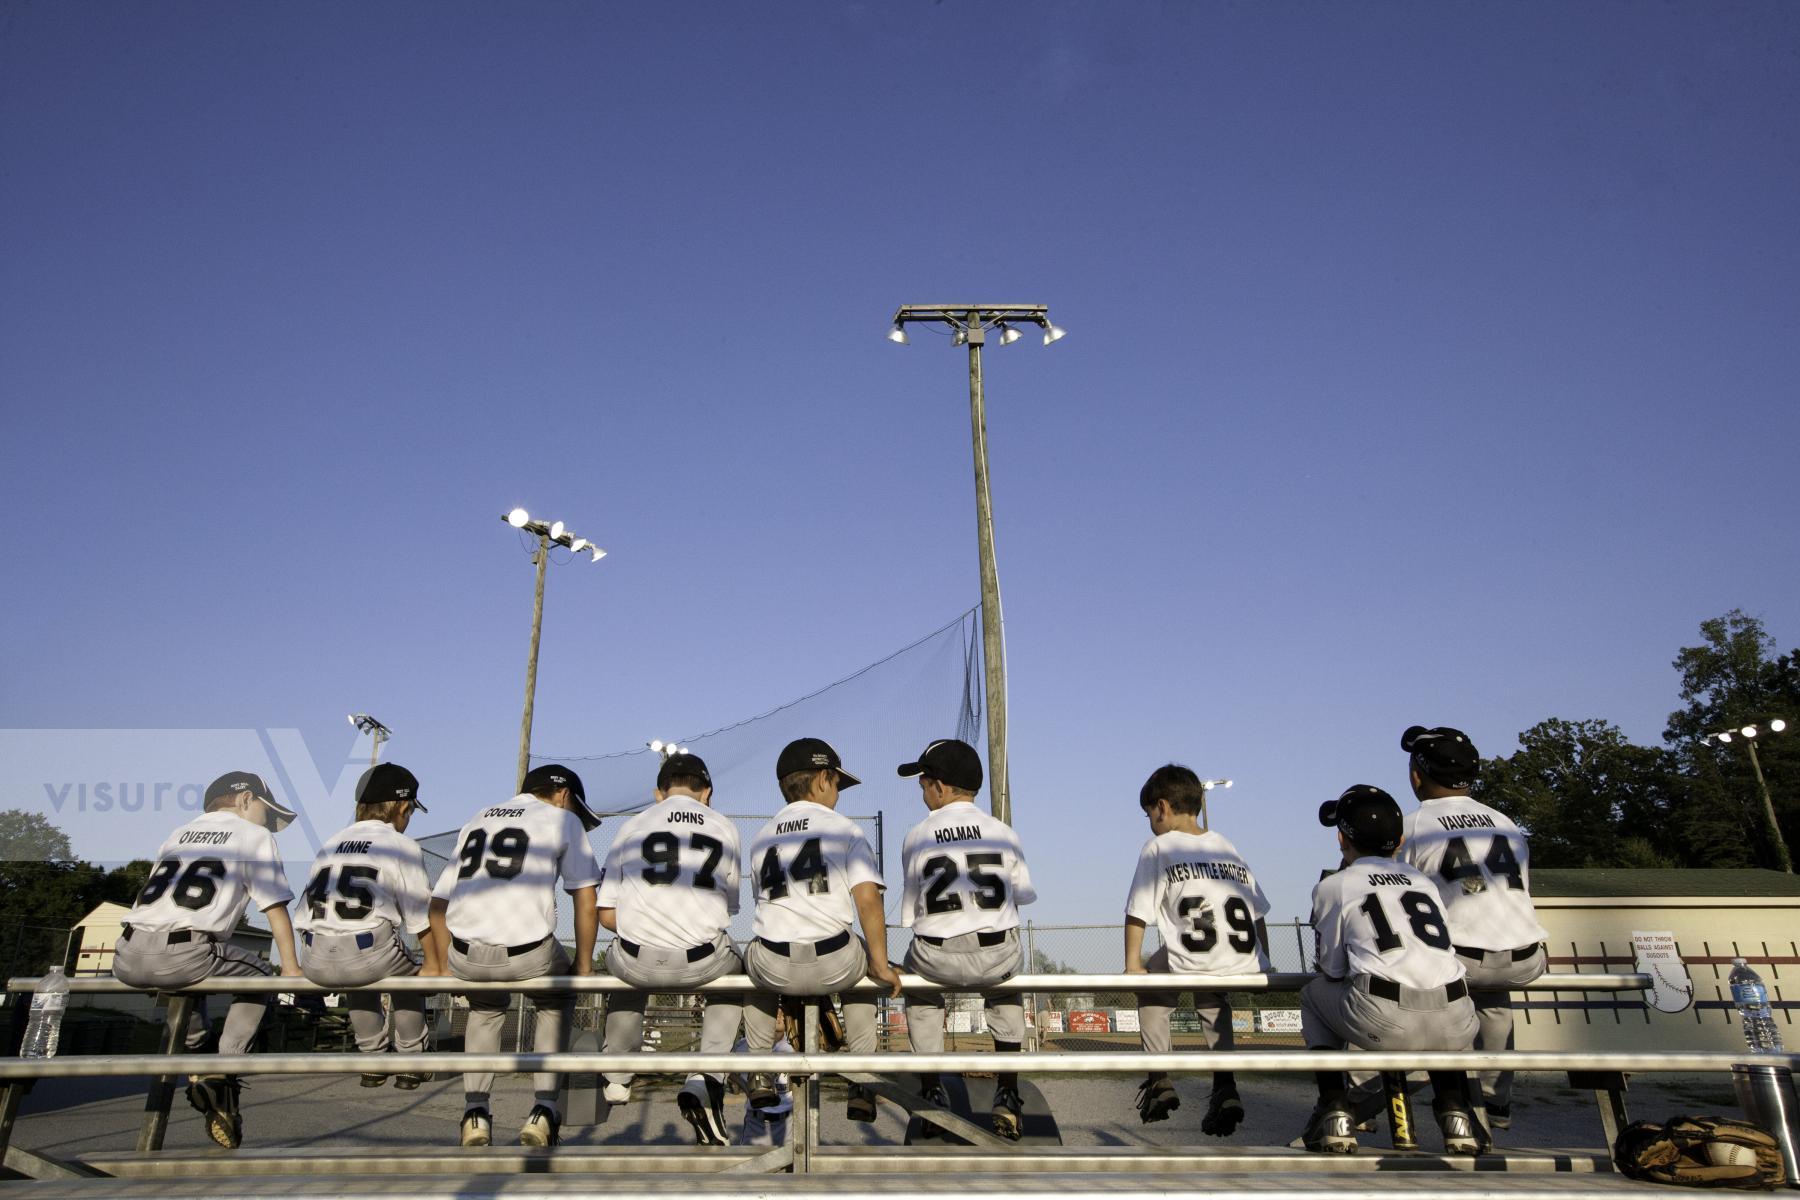 Purchase Little League team by Max Hirshfeld